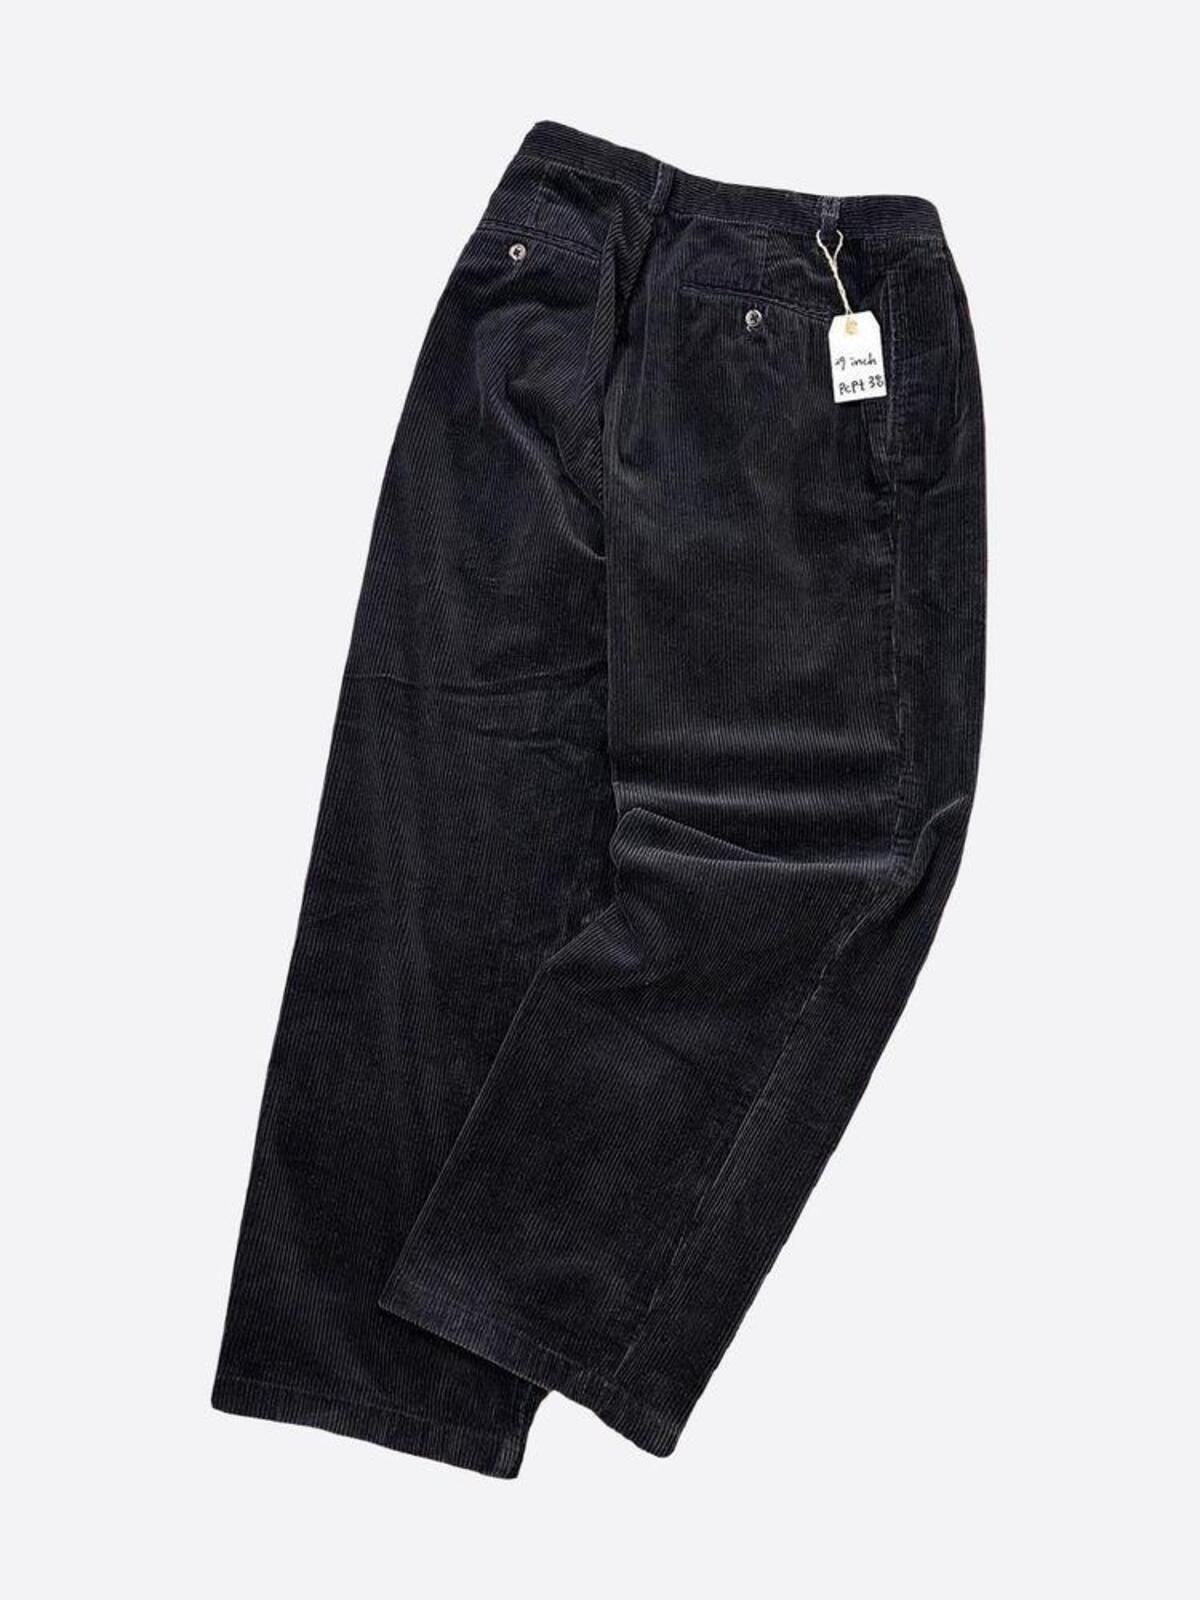 Black Corduroy Trouser (29inch) - With Homie 위드호미